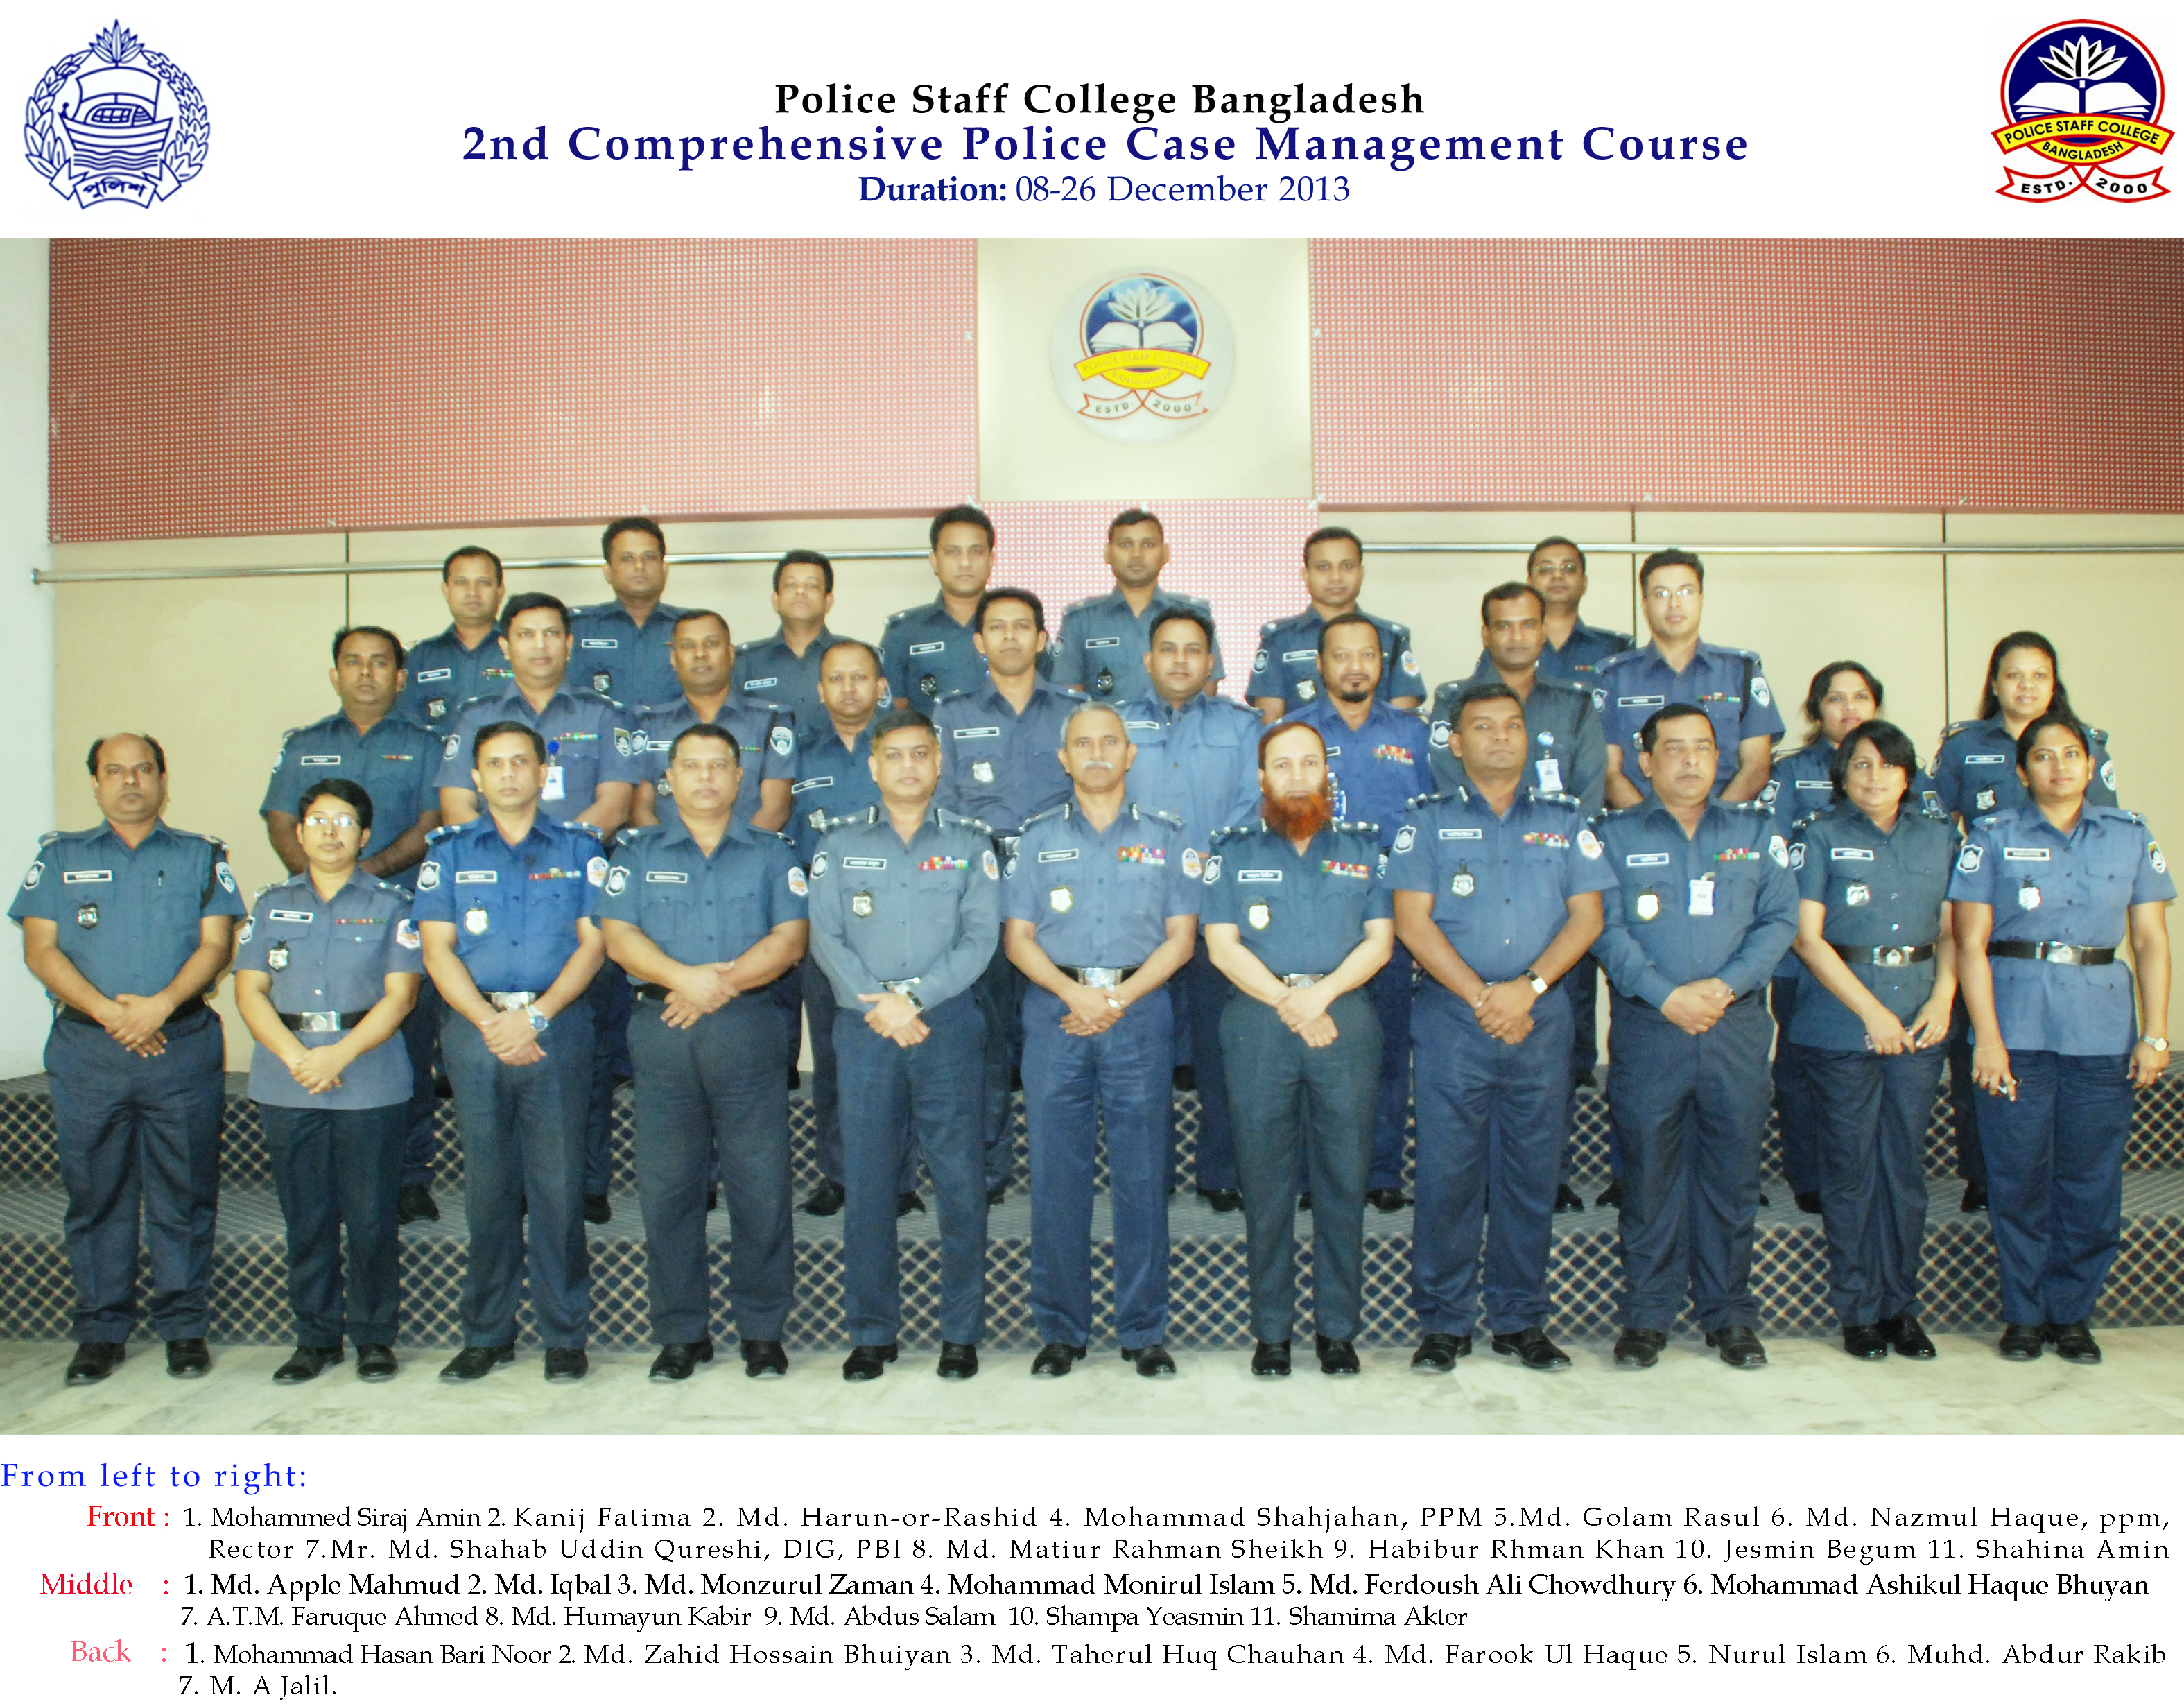 Participant of 2nd Comprehensive Police Case Management Course